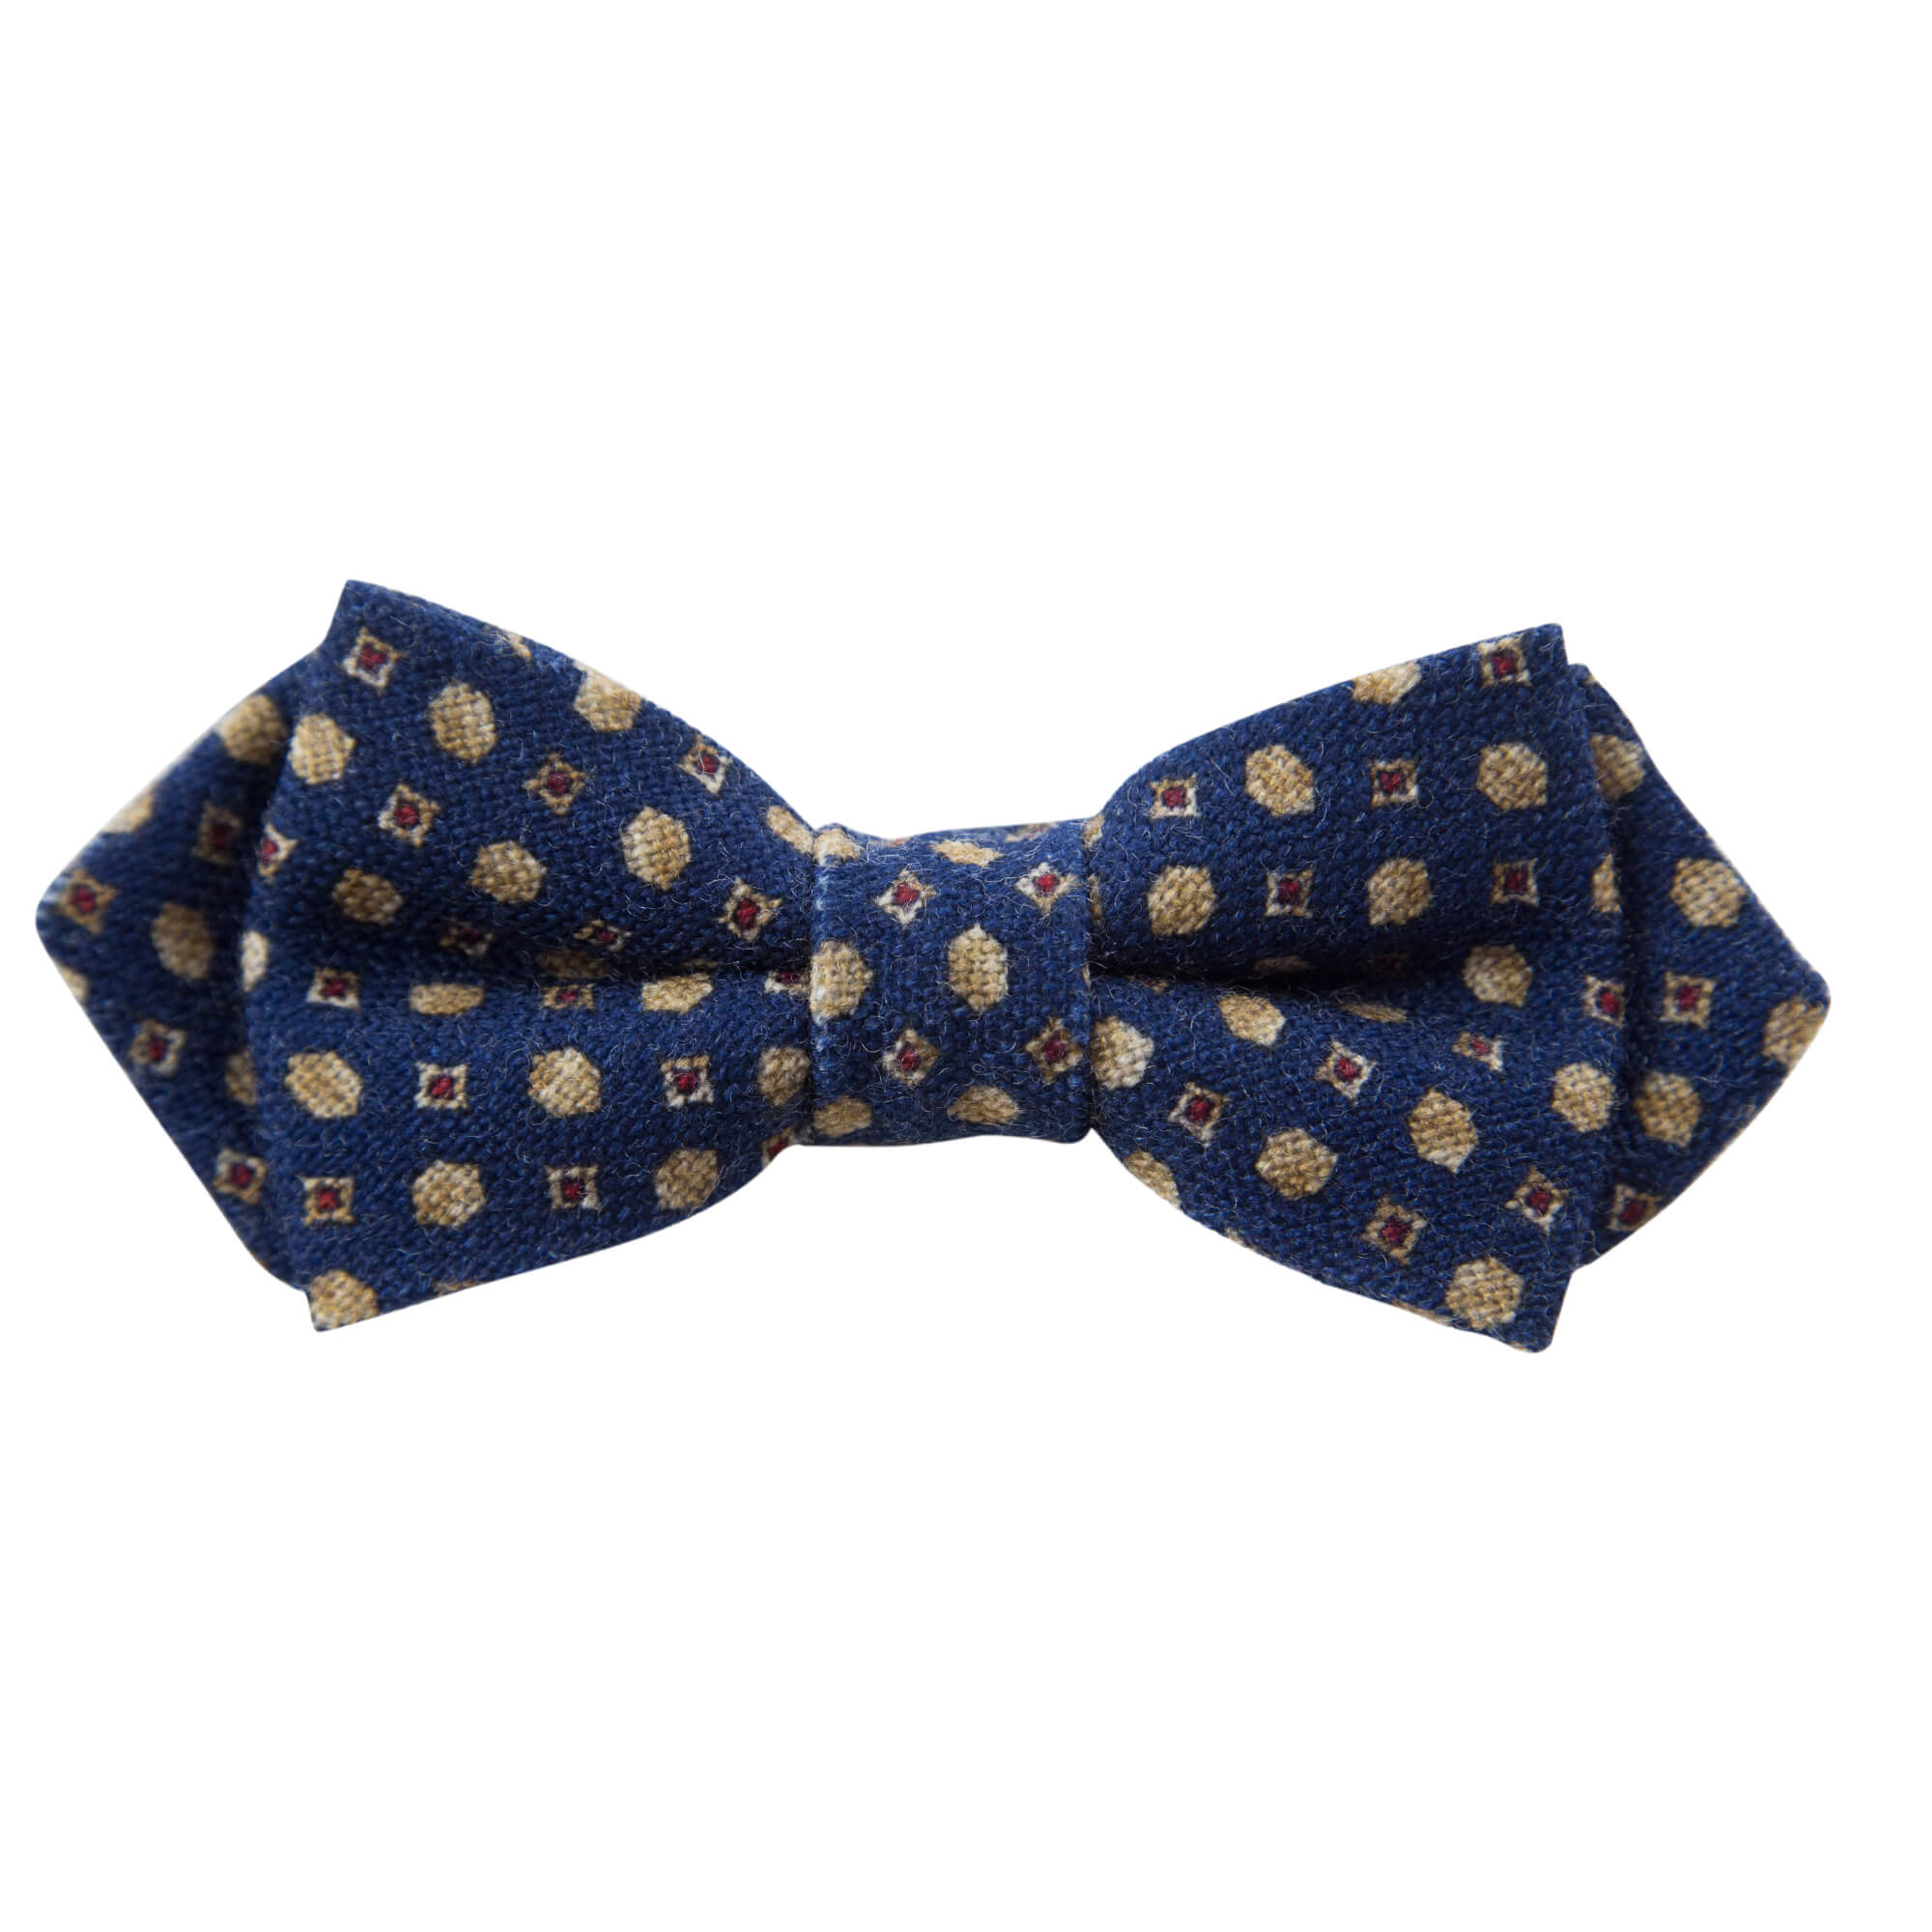 BLUE WITH GOLD AND RED MOTIF BOW TIE